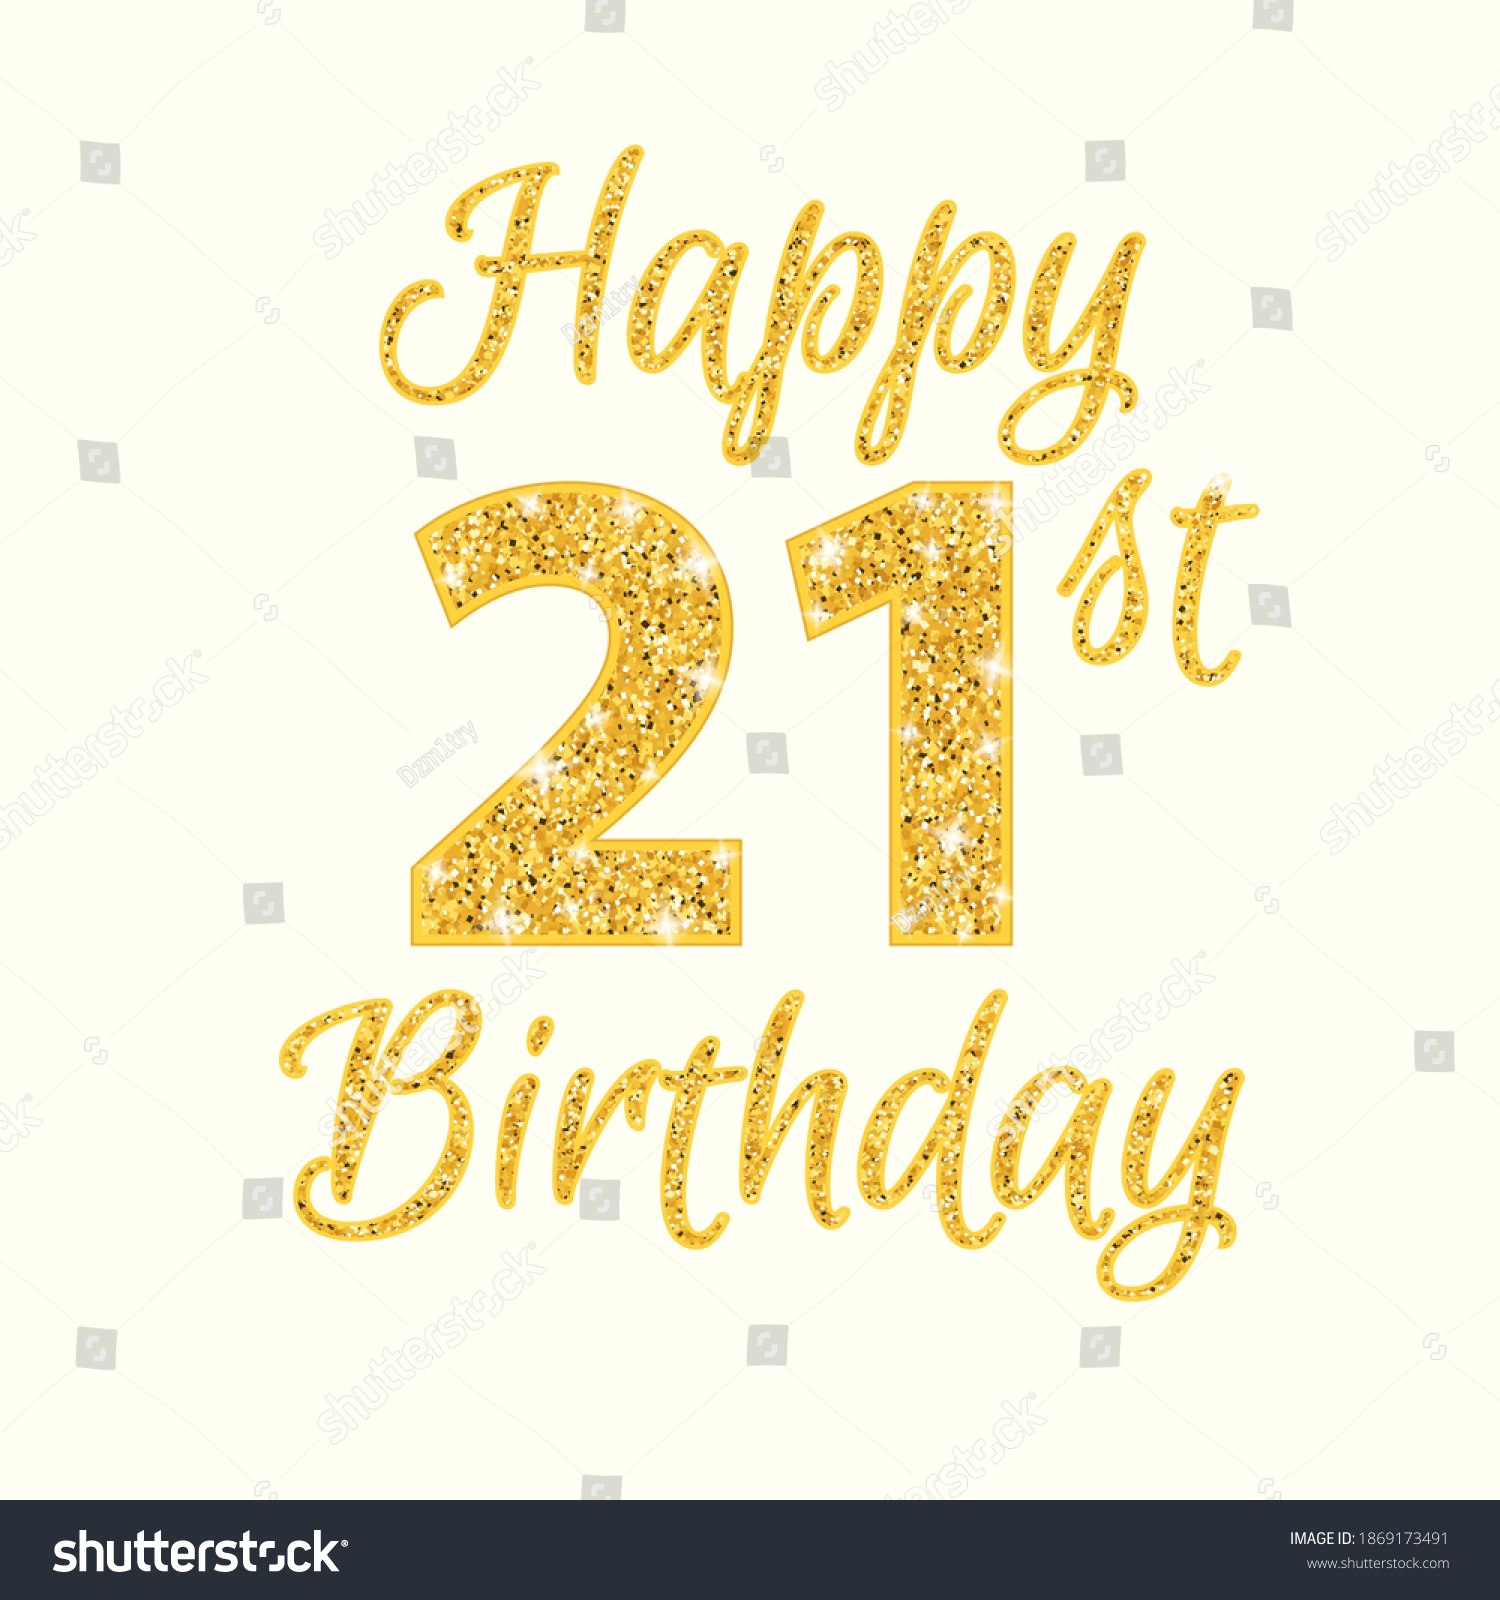 SVG of Happy birthday 21st glitter greeting card. Clipart image isolated on white background. svg